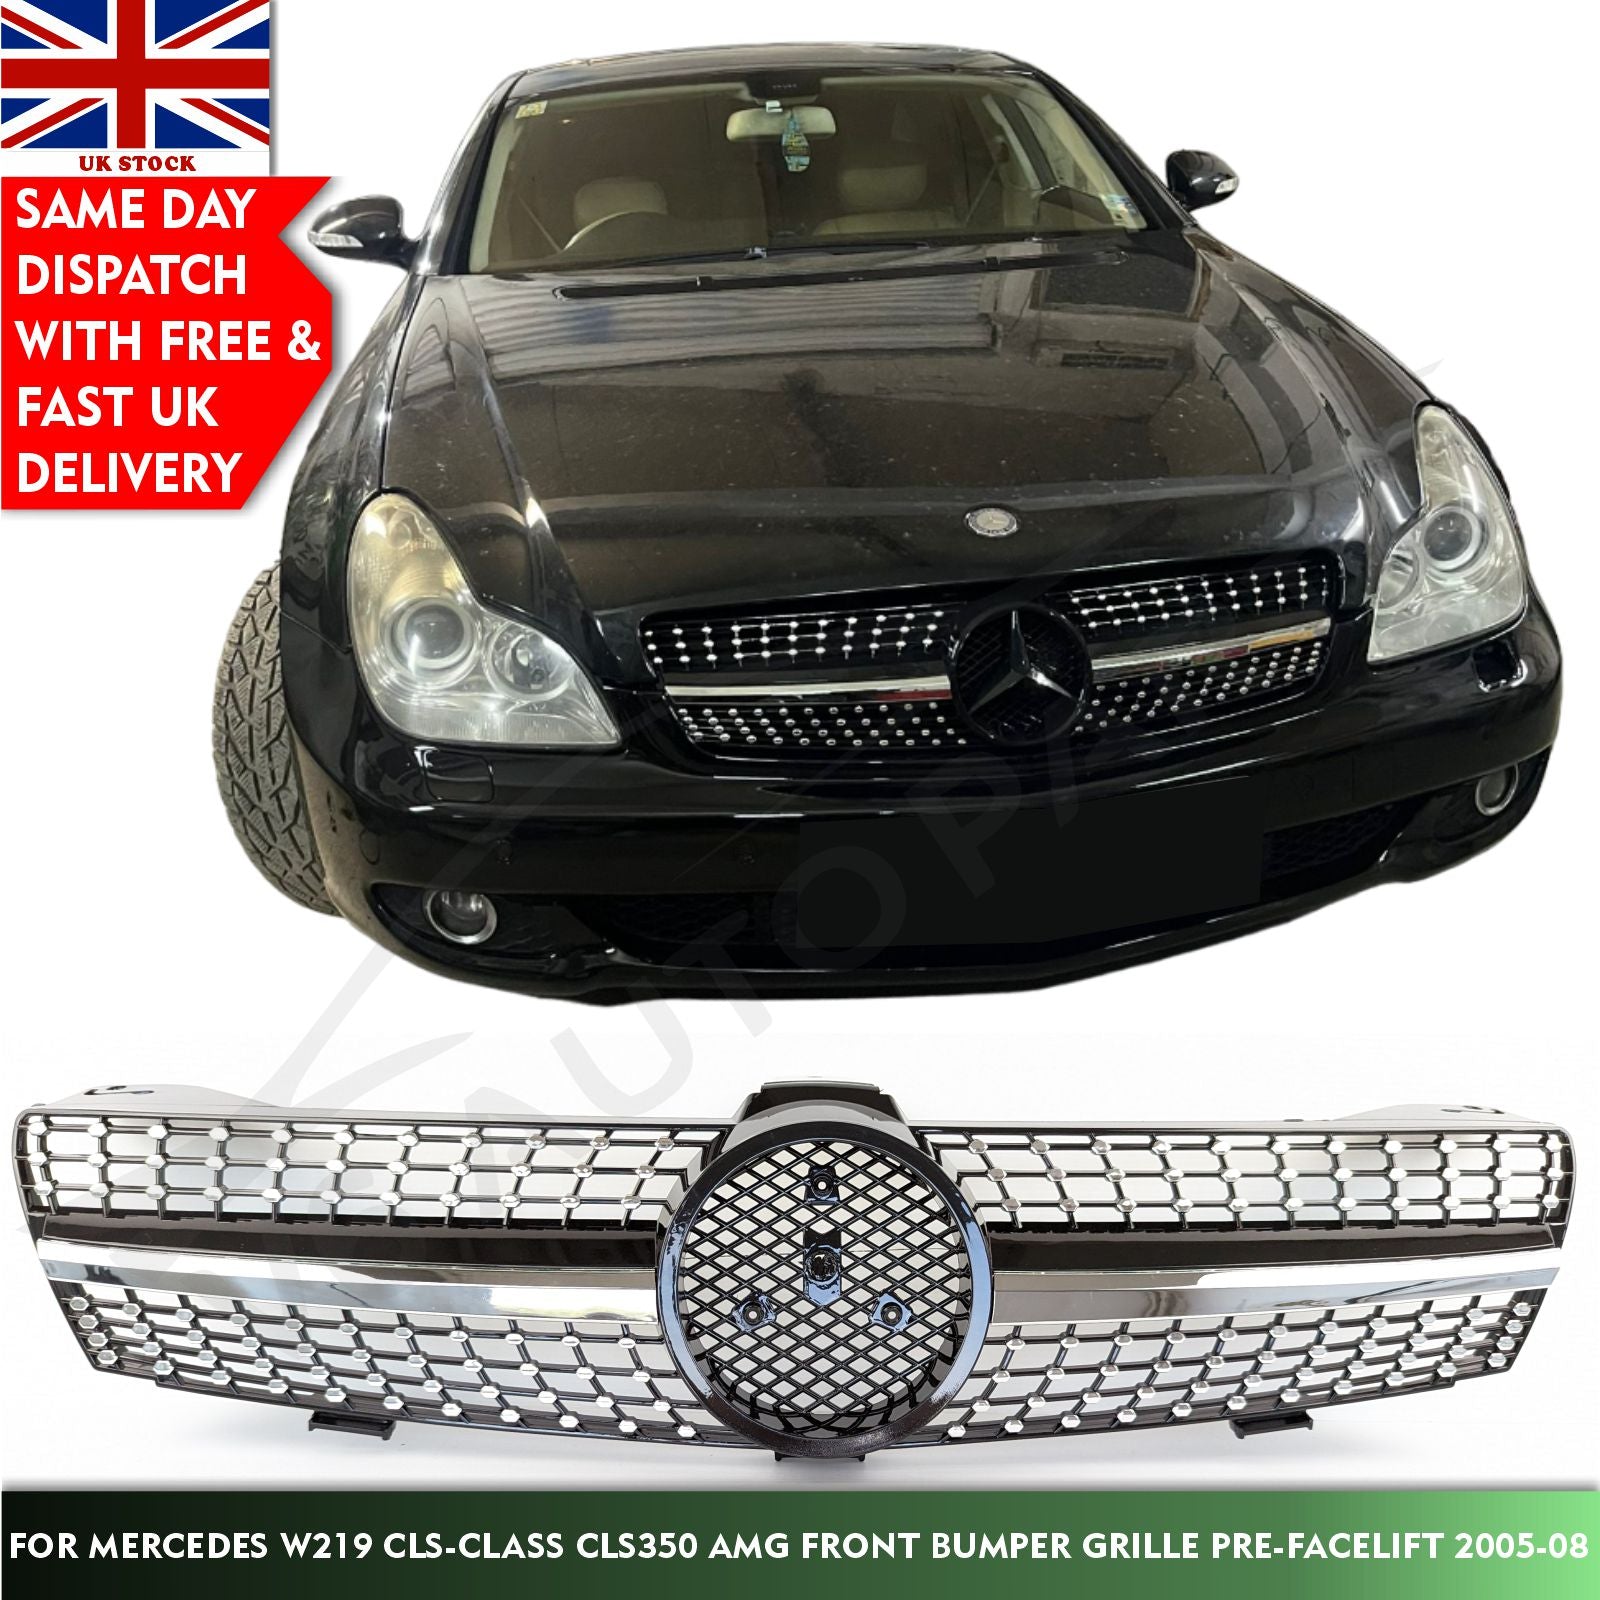 For Mercedes CLS-Class W219 AMG CLS600 Front Bumper Grille Pre-Facelift 2005-08